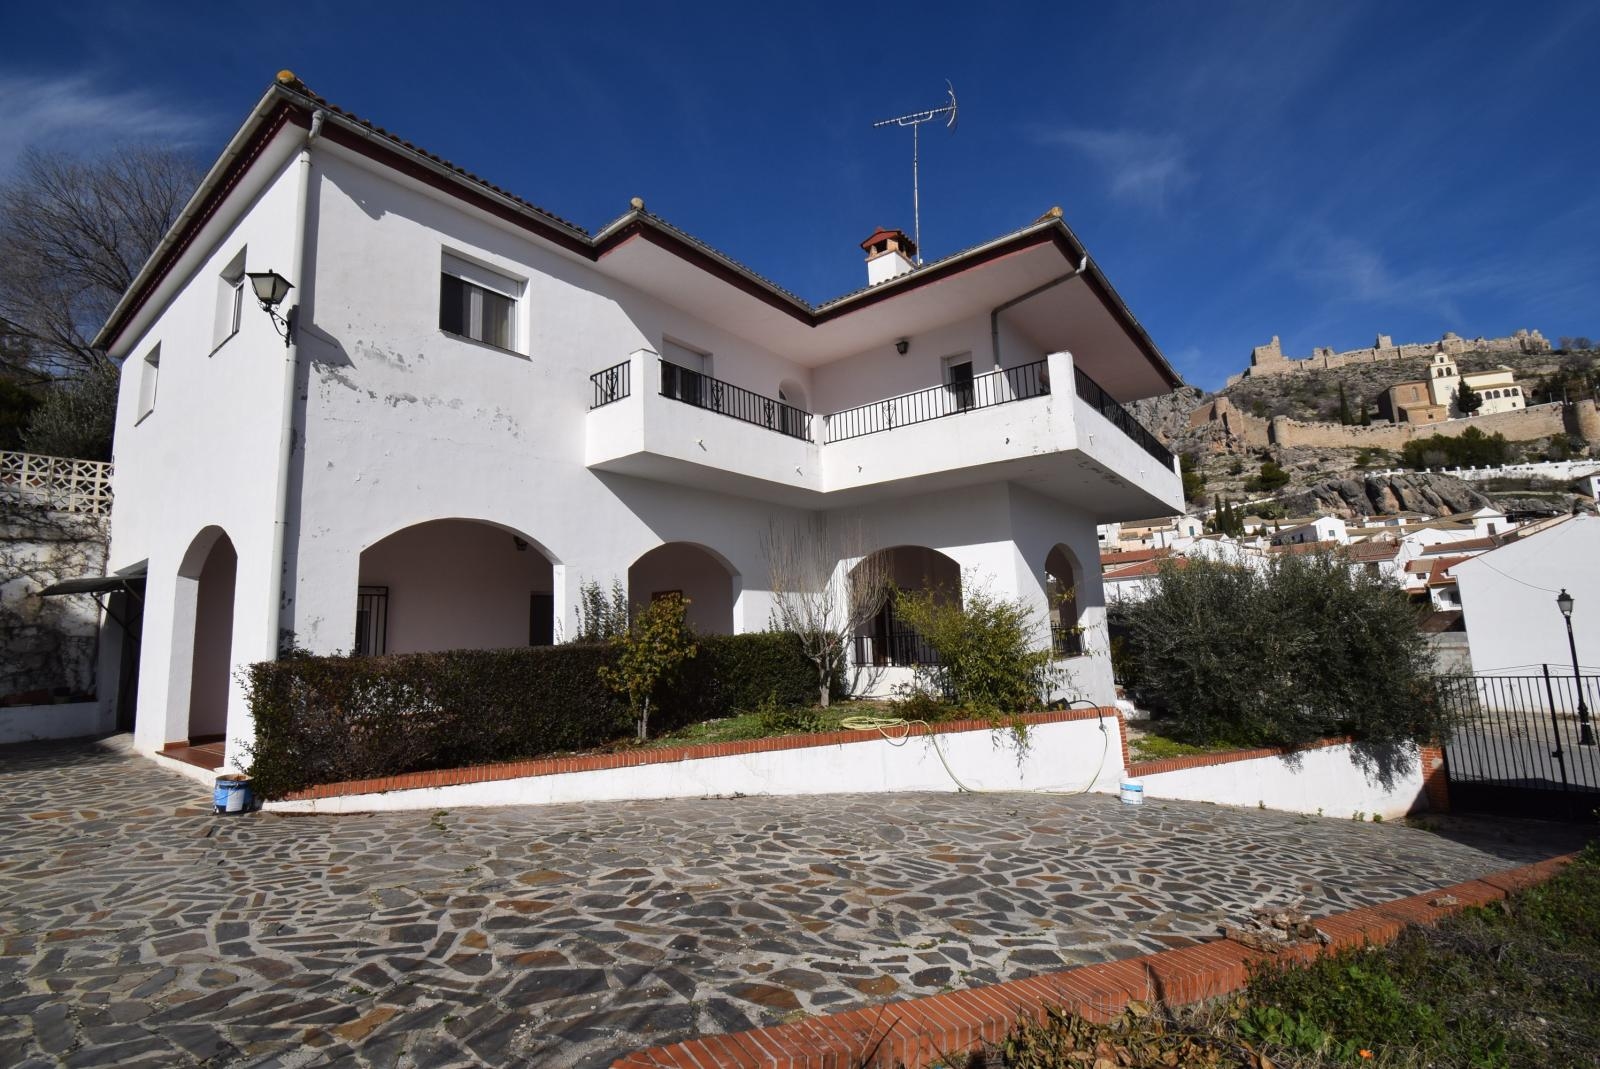 4 BED 2 BATH LOVELY DETACHED VILLA WITH STUNNING VIEWS